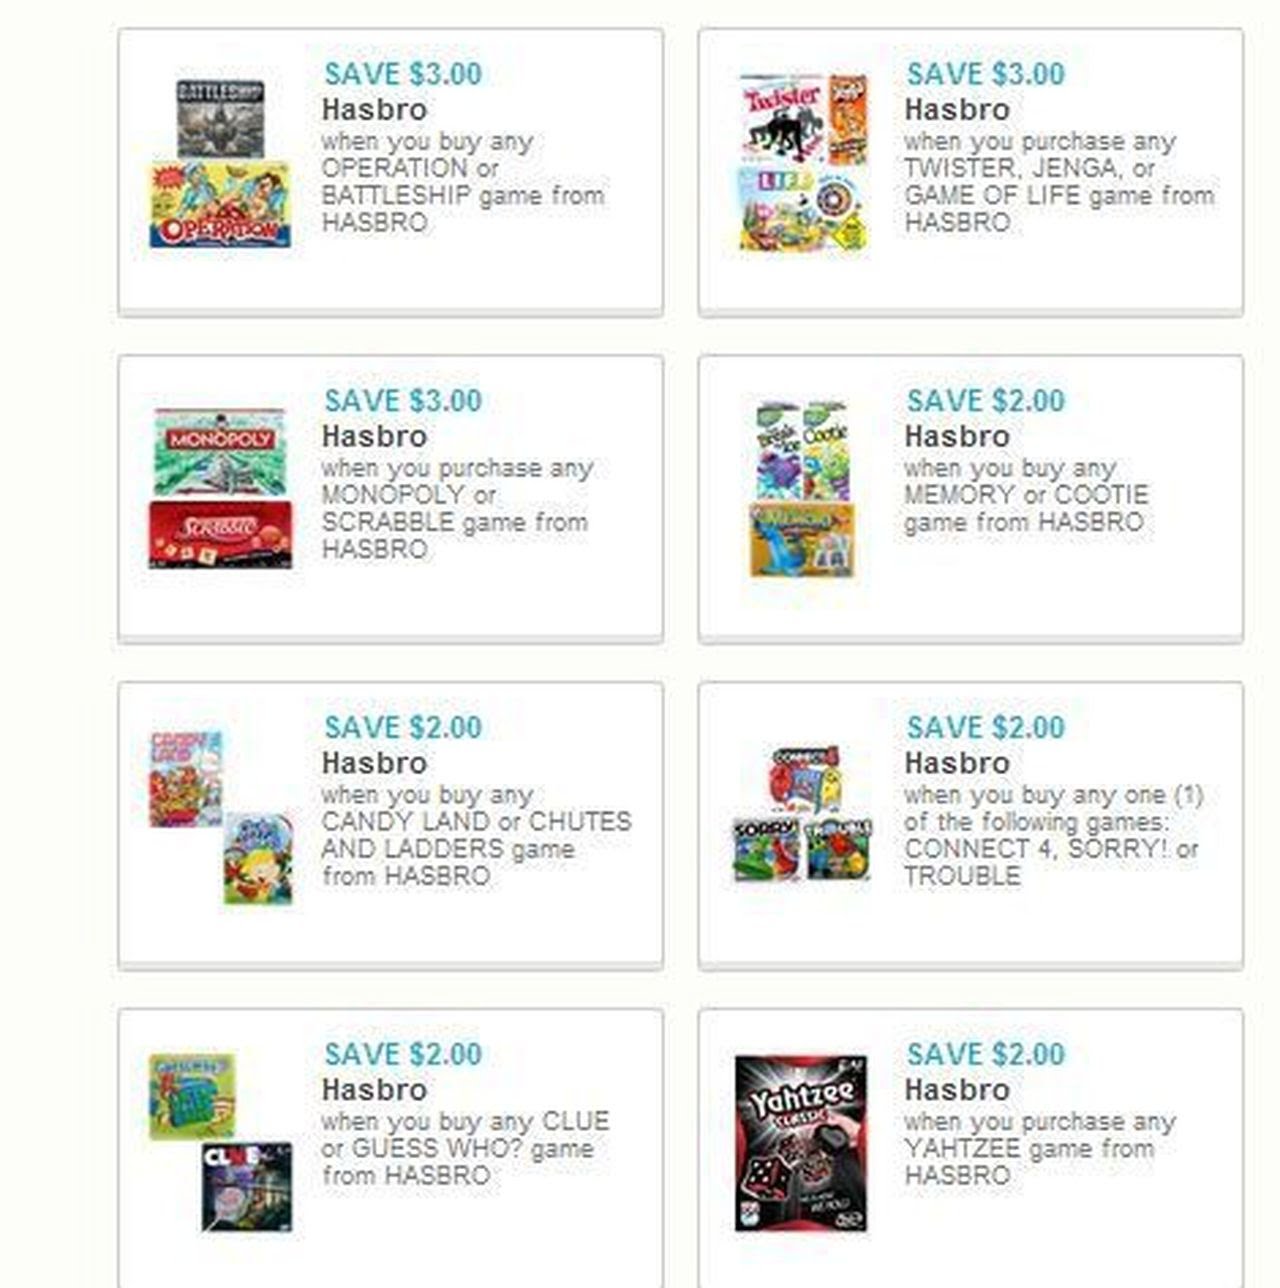 8 New Hasbro Toy Games Printable Coupons Al